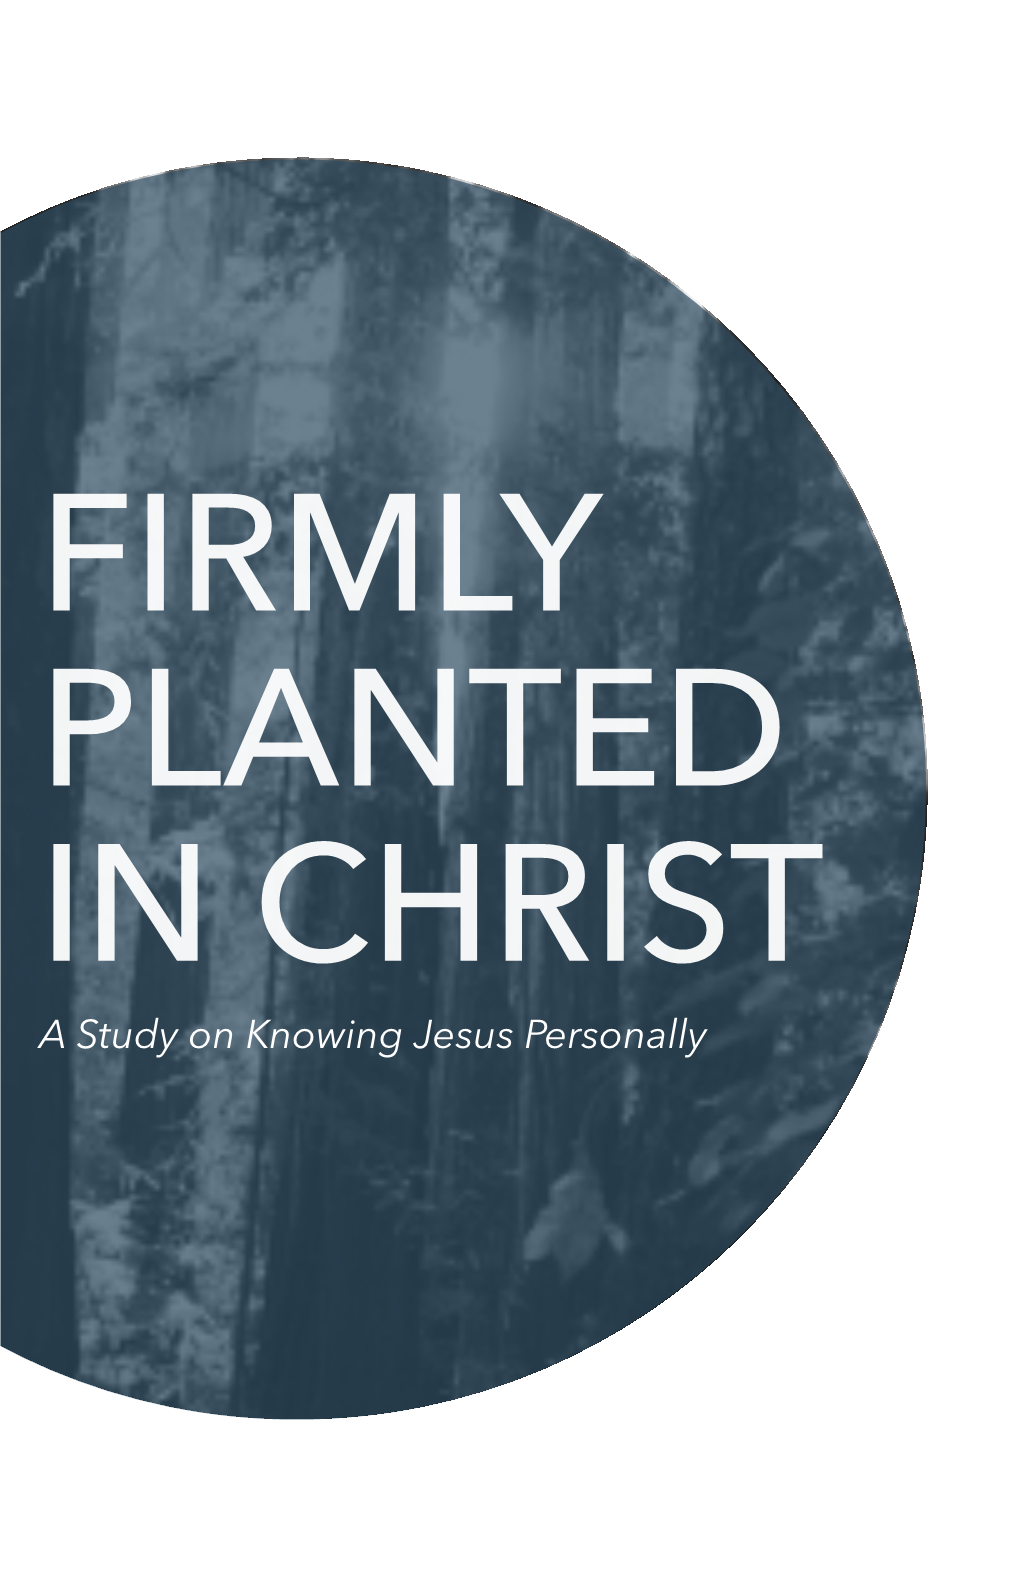 FIRMLY PLANTED in CHRIST a Study on Knowing Jesus Personally © 2018 Campus Outreach Augusta